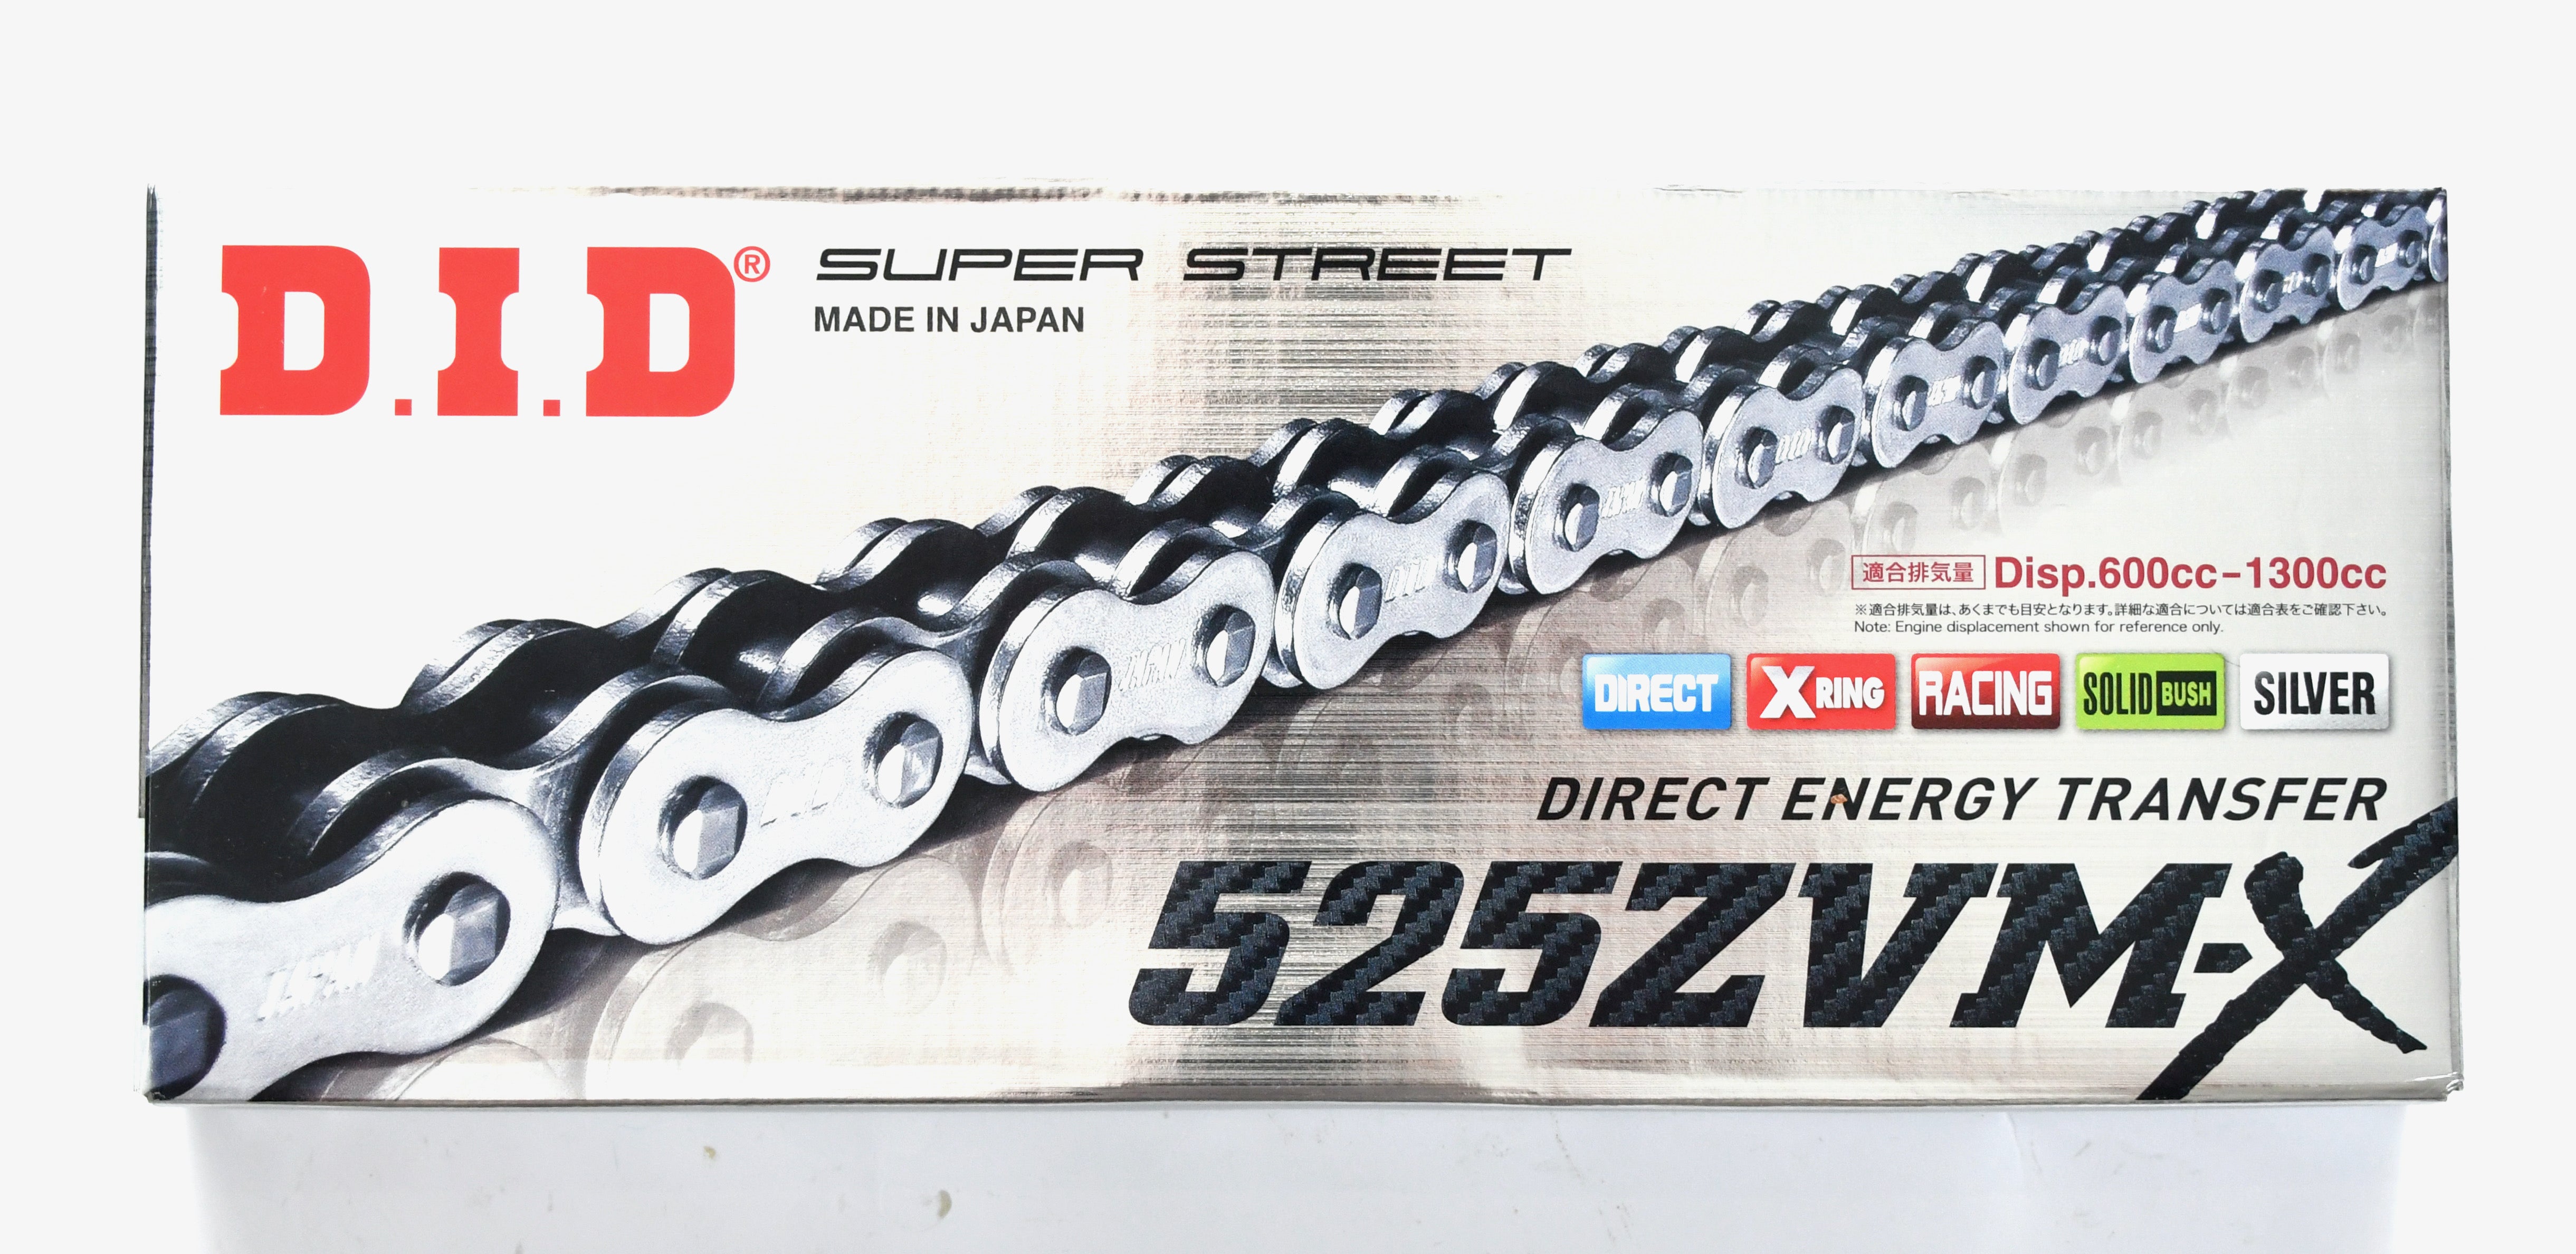 DID 525 ZVMX Super Street Extra Heavy Duty Chain 114 Links - Gold